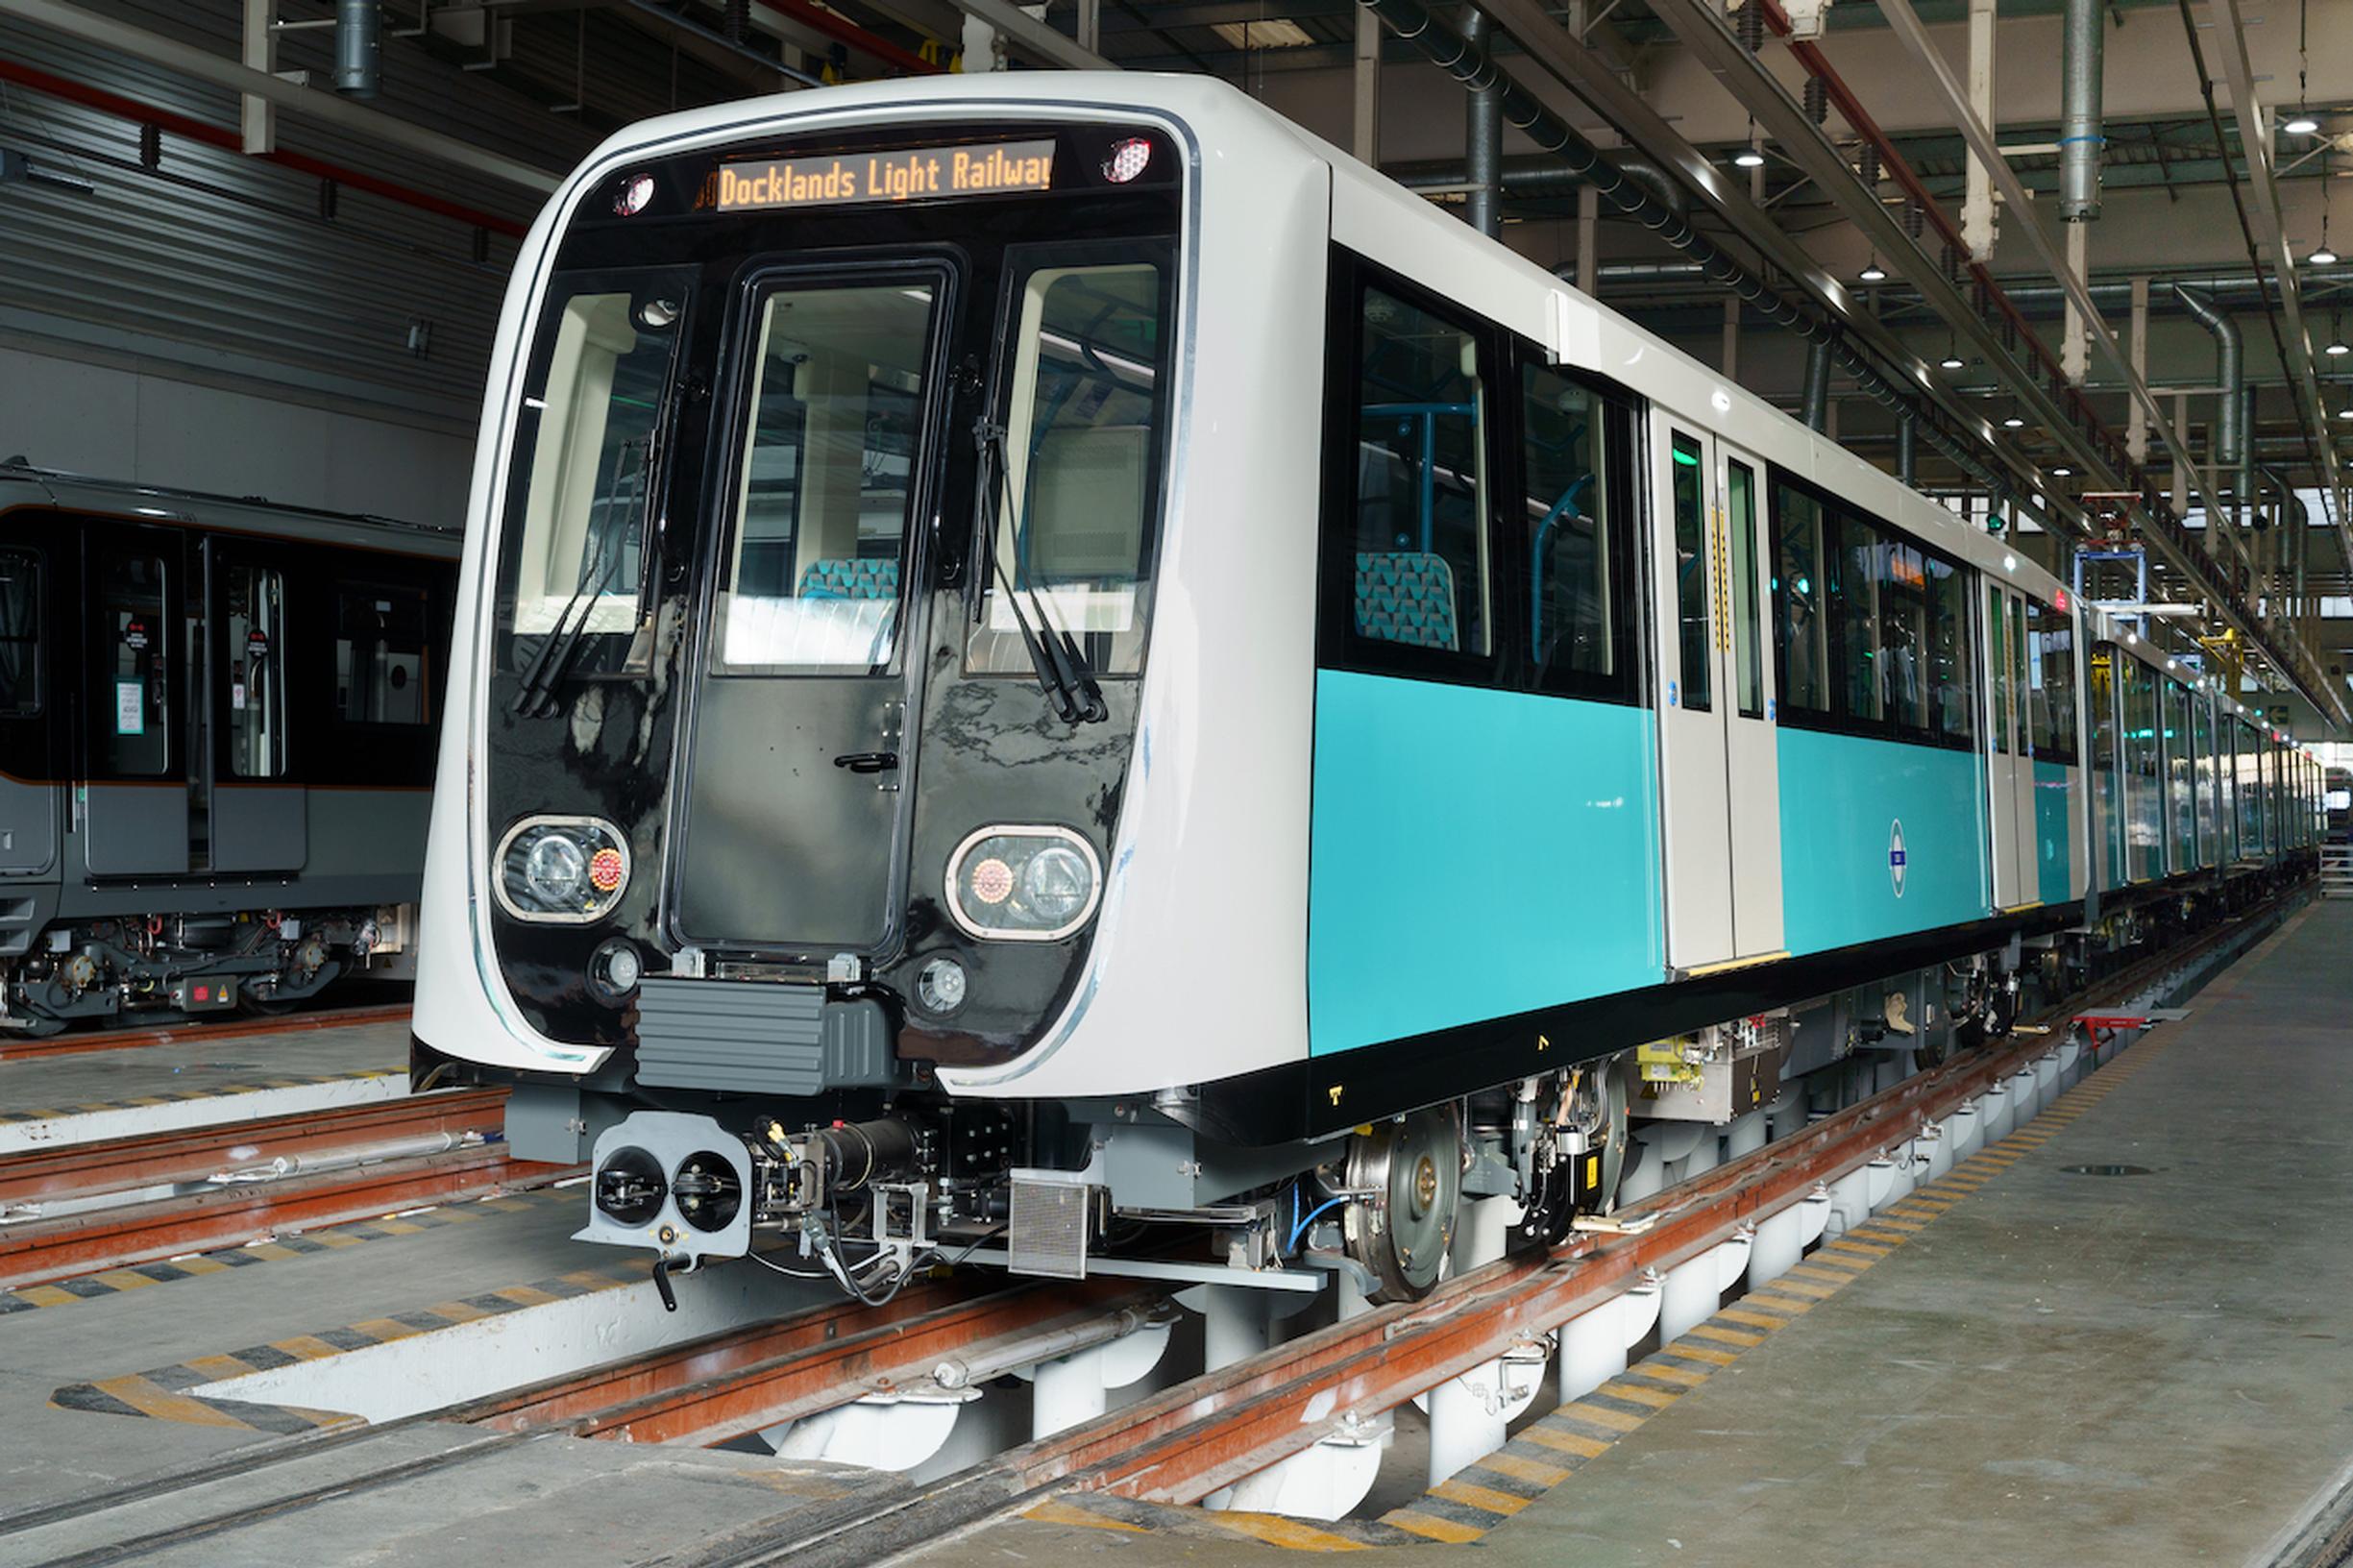 TfL`s budget surplus will pay for new trains on the Docklands Light Railway